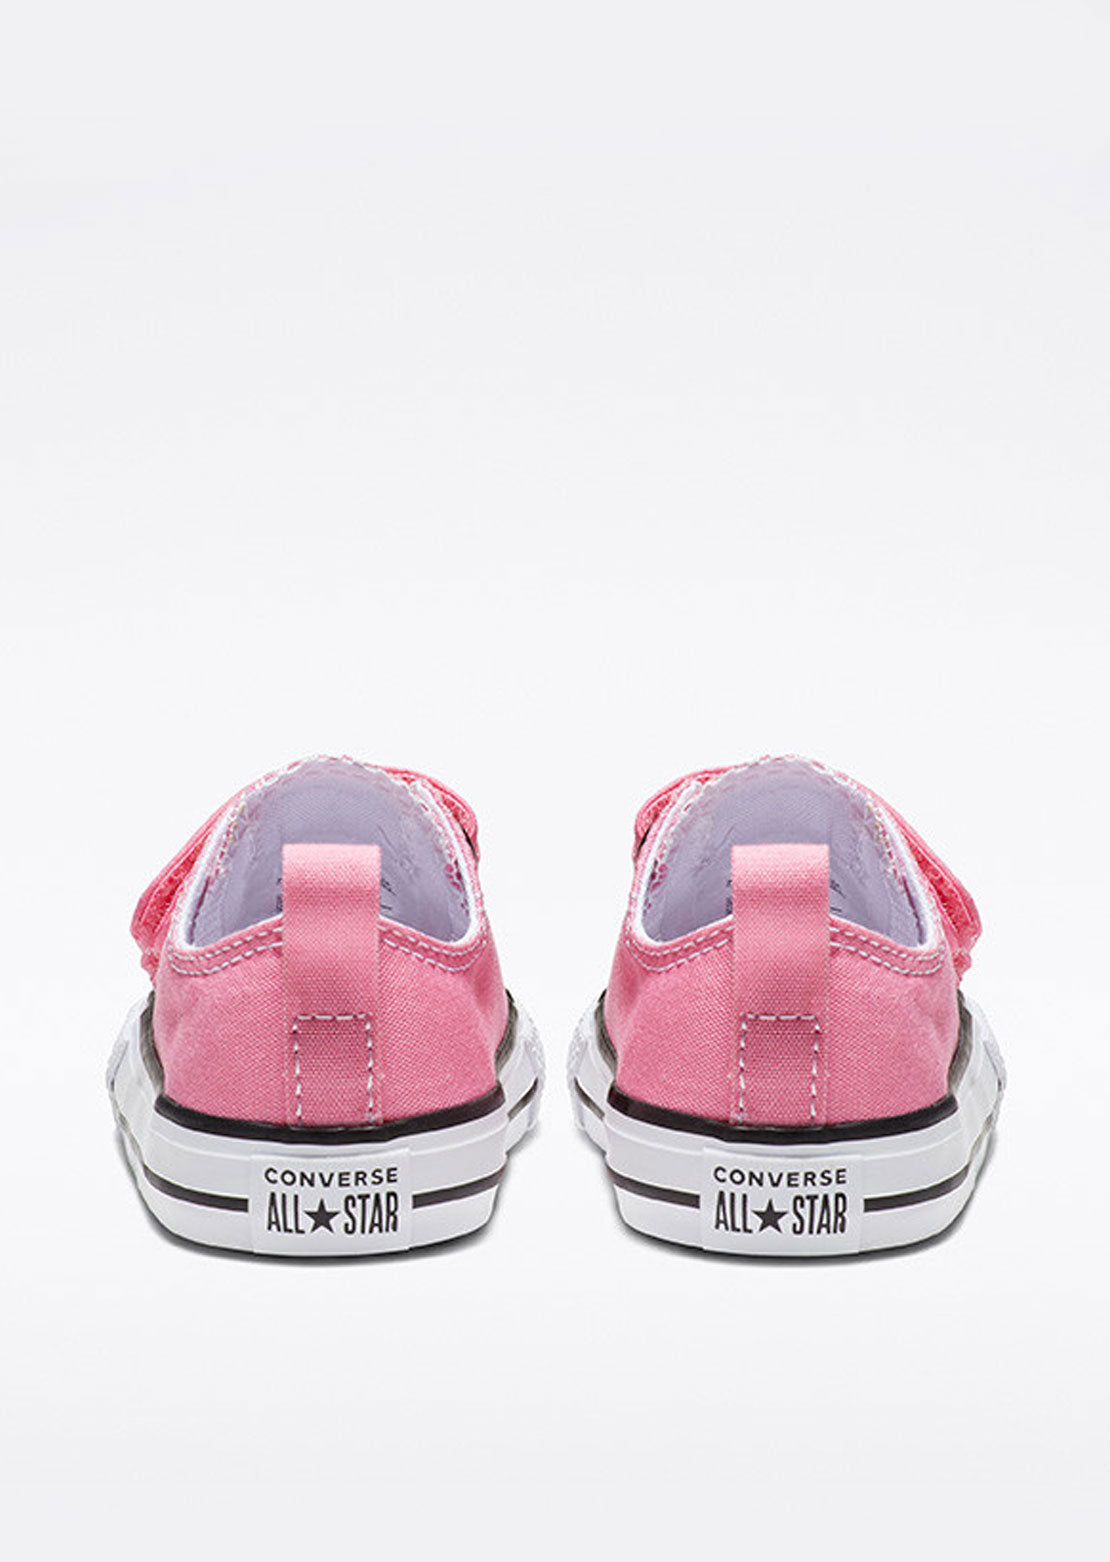 Converse Junior Toddler Chuck Taylor All Star 2V Shoes Pink